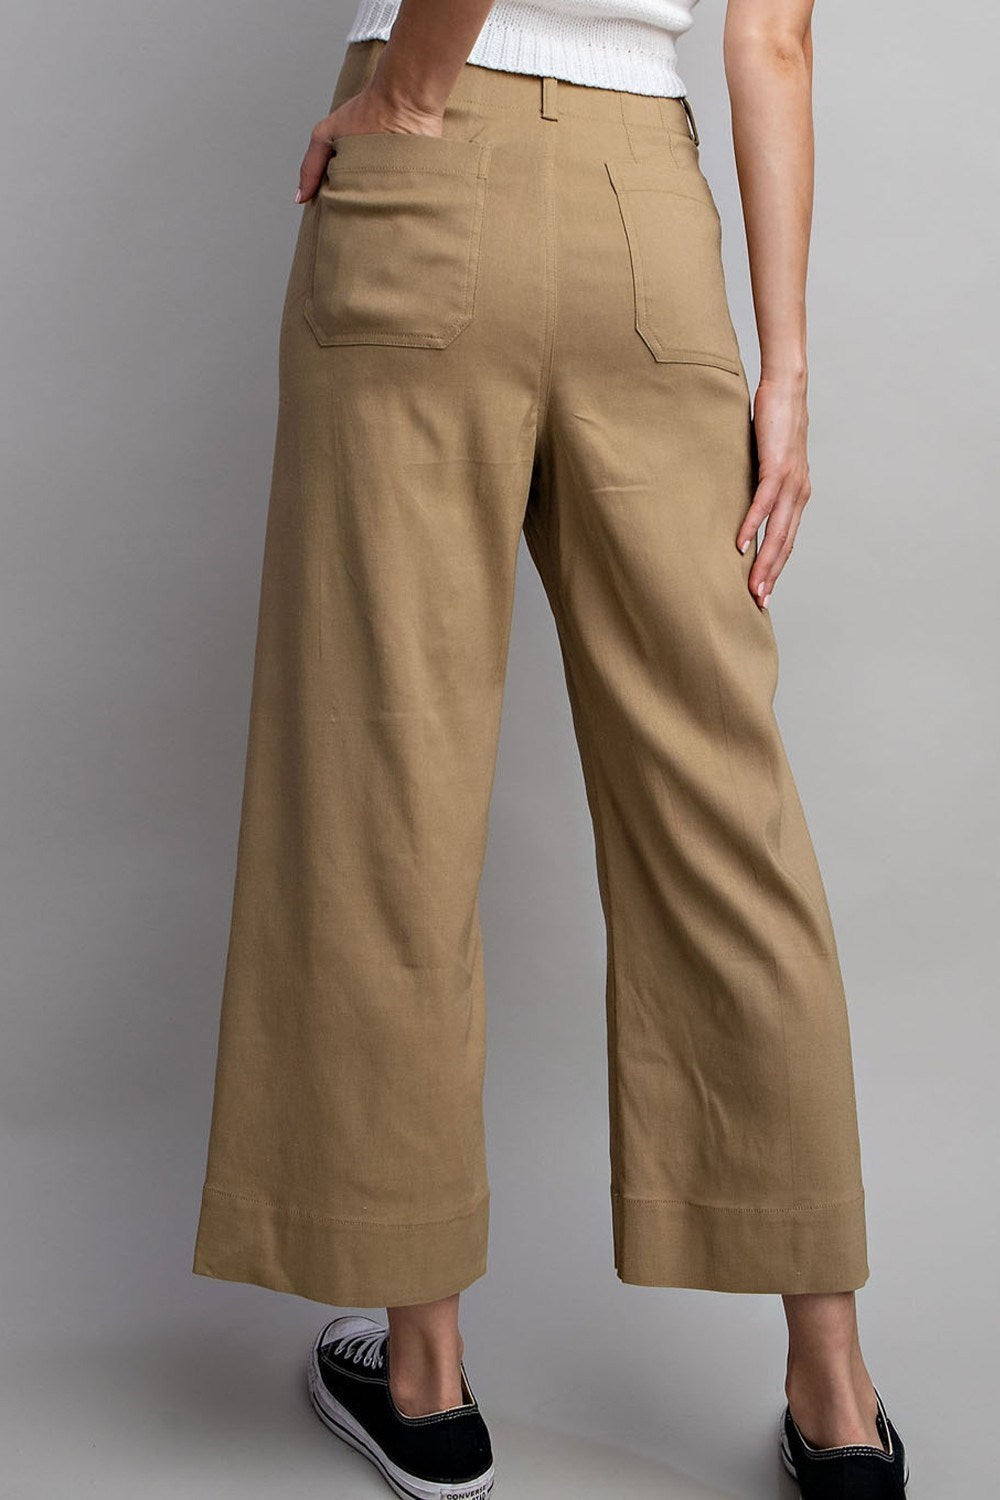 Leader of the Pack Pants -Plus Size